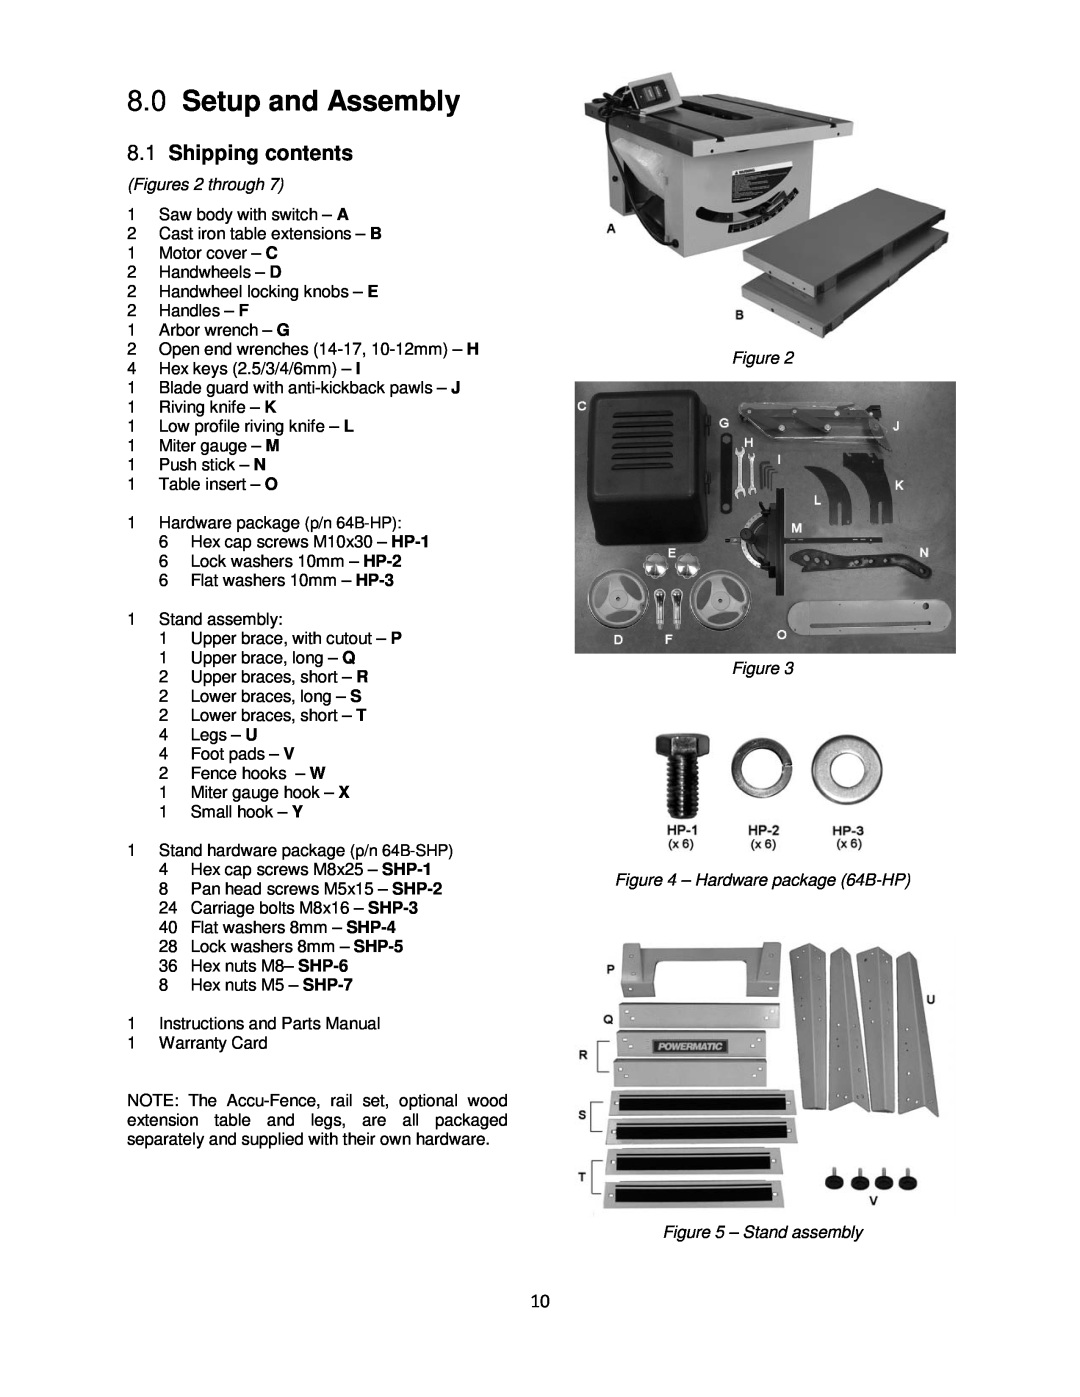 Powermatic 64B operating instructions Setup and Assembly, Shipping contents 